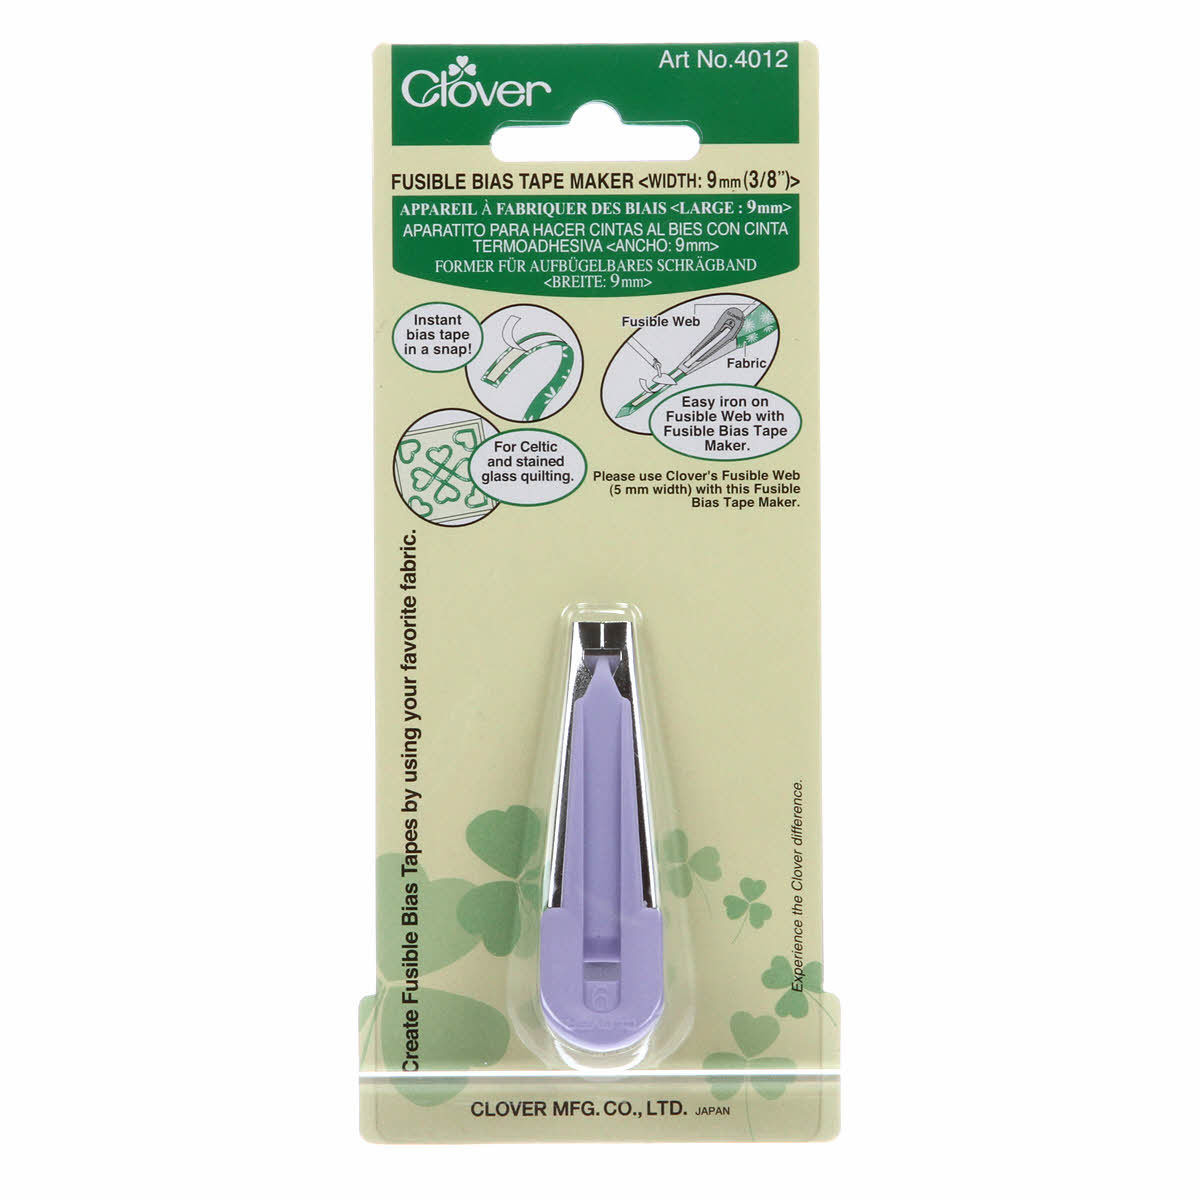 Clover Fusible Bias Tape Maker 9mm, 3/8in